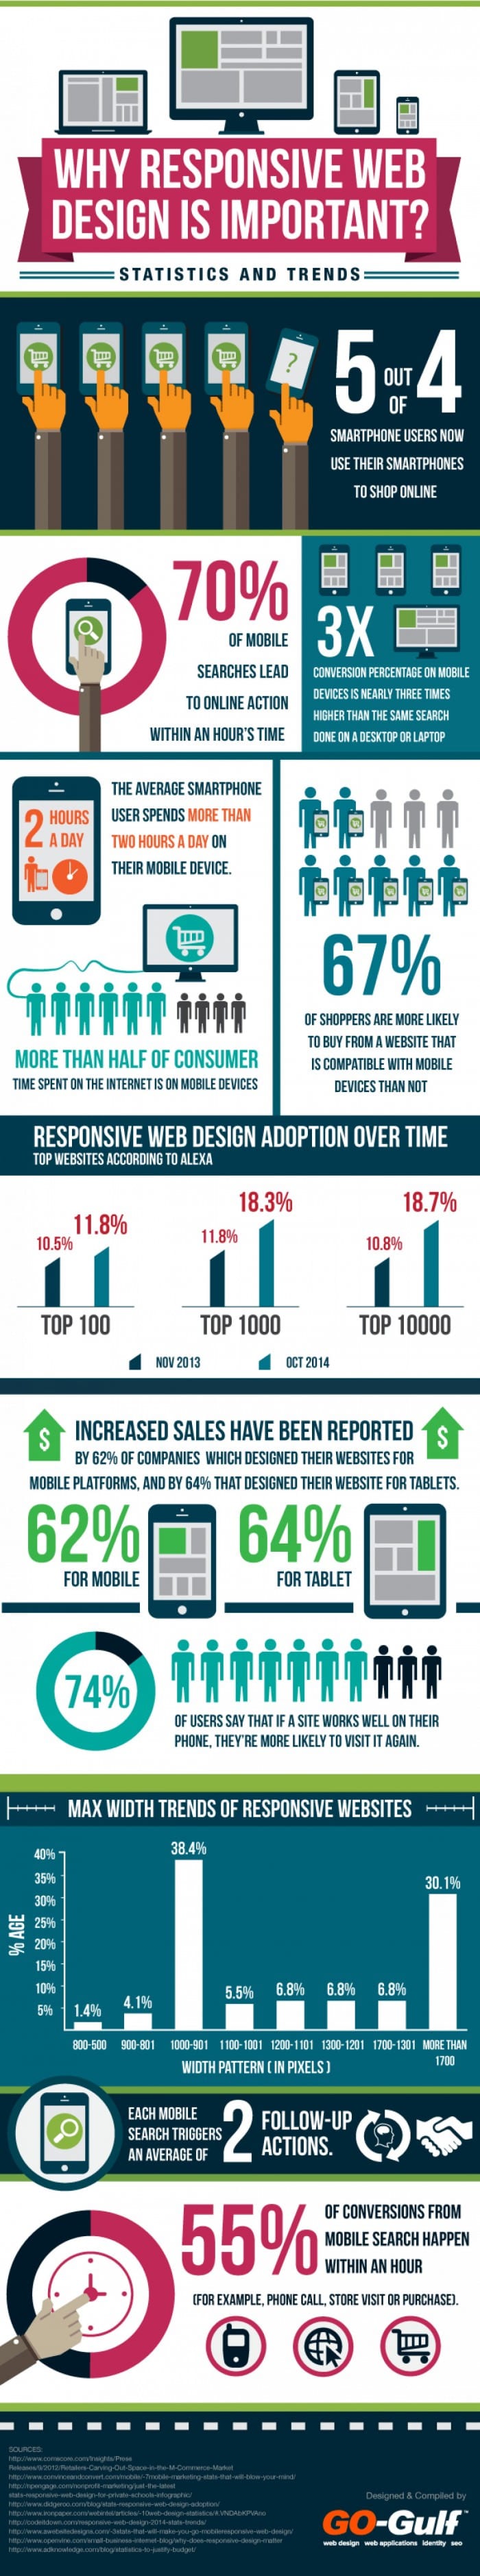 why-responsive-web-design-is-important